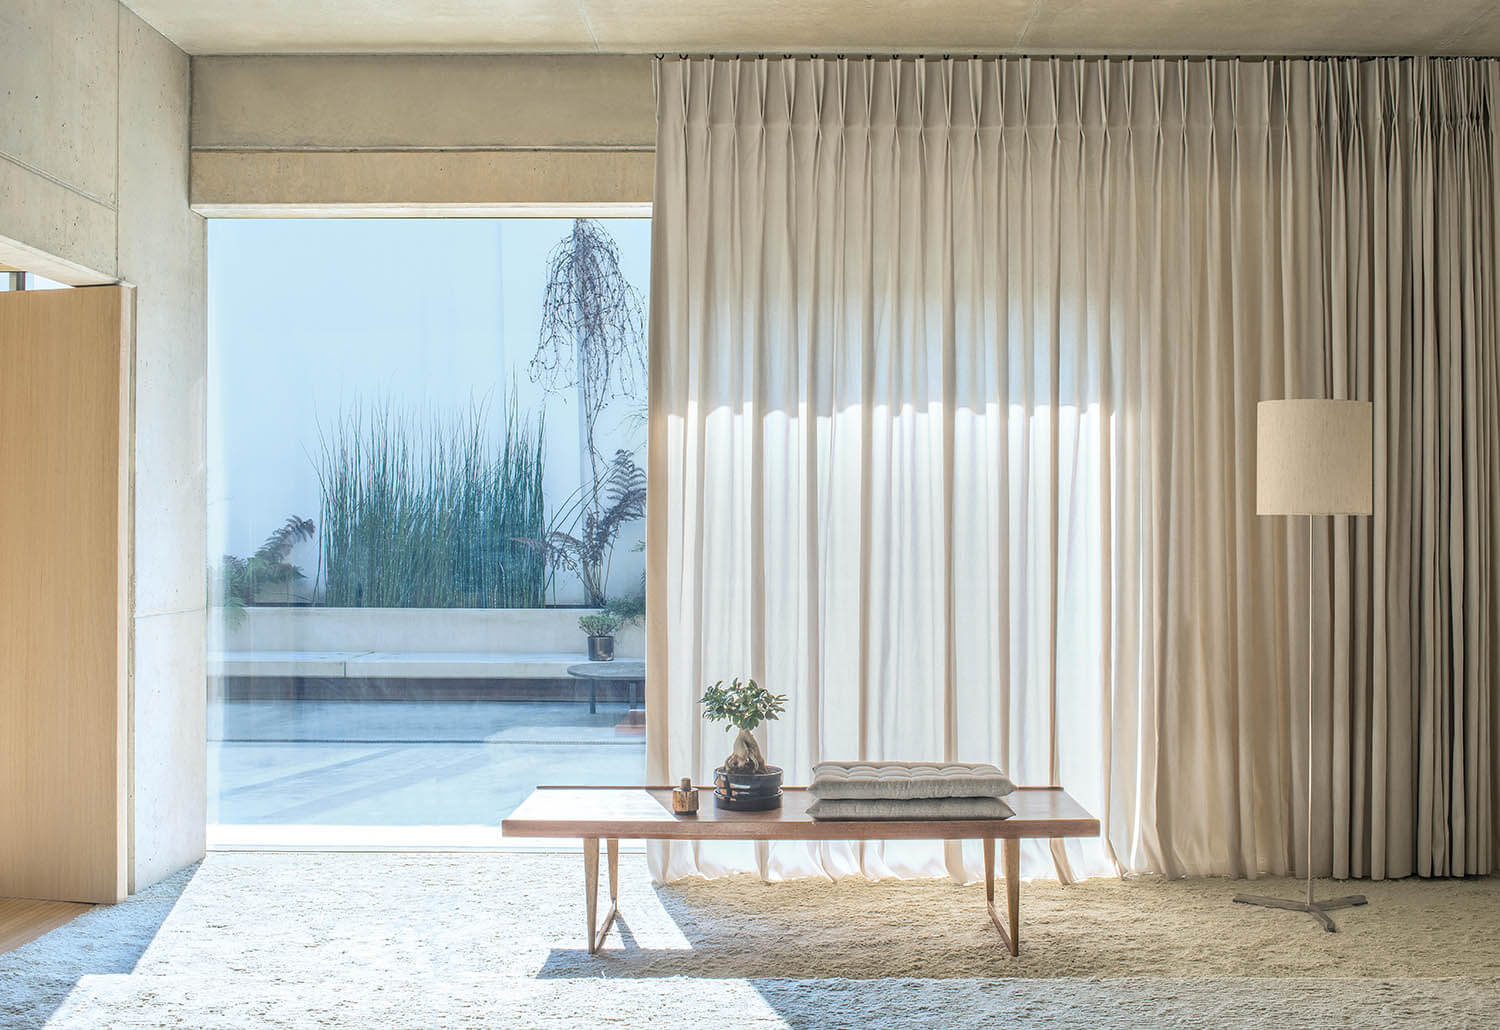 CURTAIN PLEATS – CHOICE, FORM AND FUNCTION FOR EVERY HOME